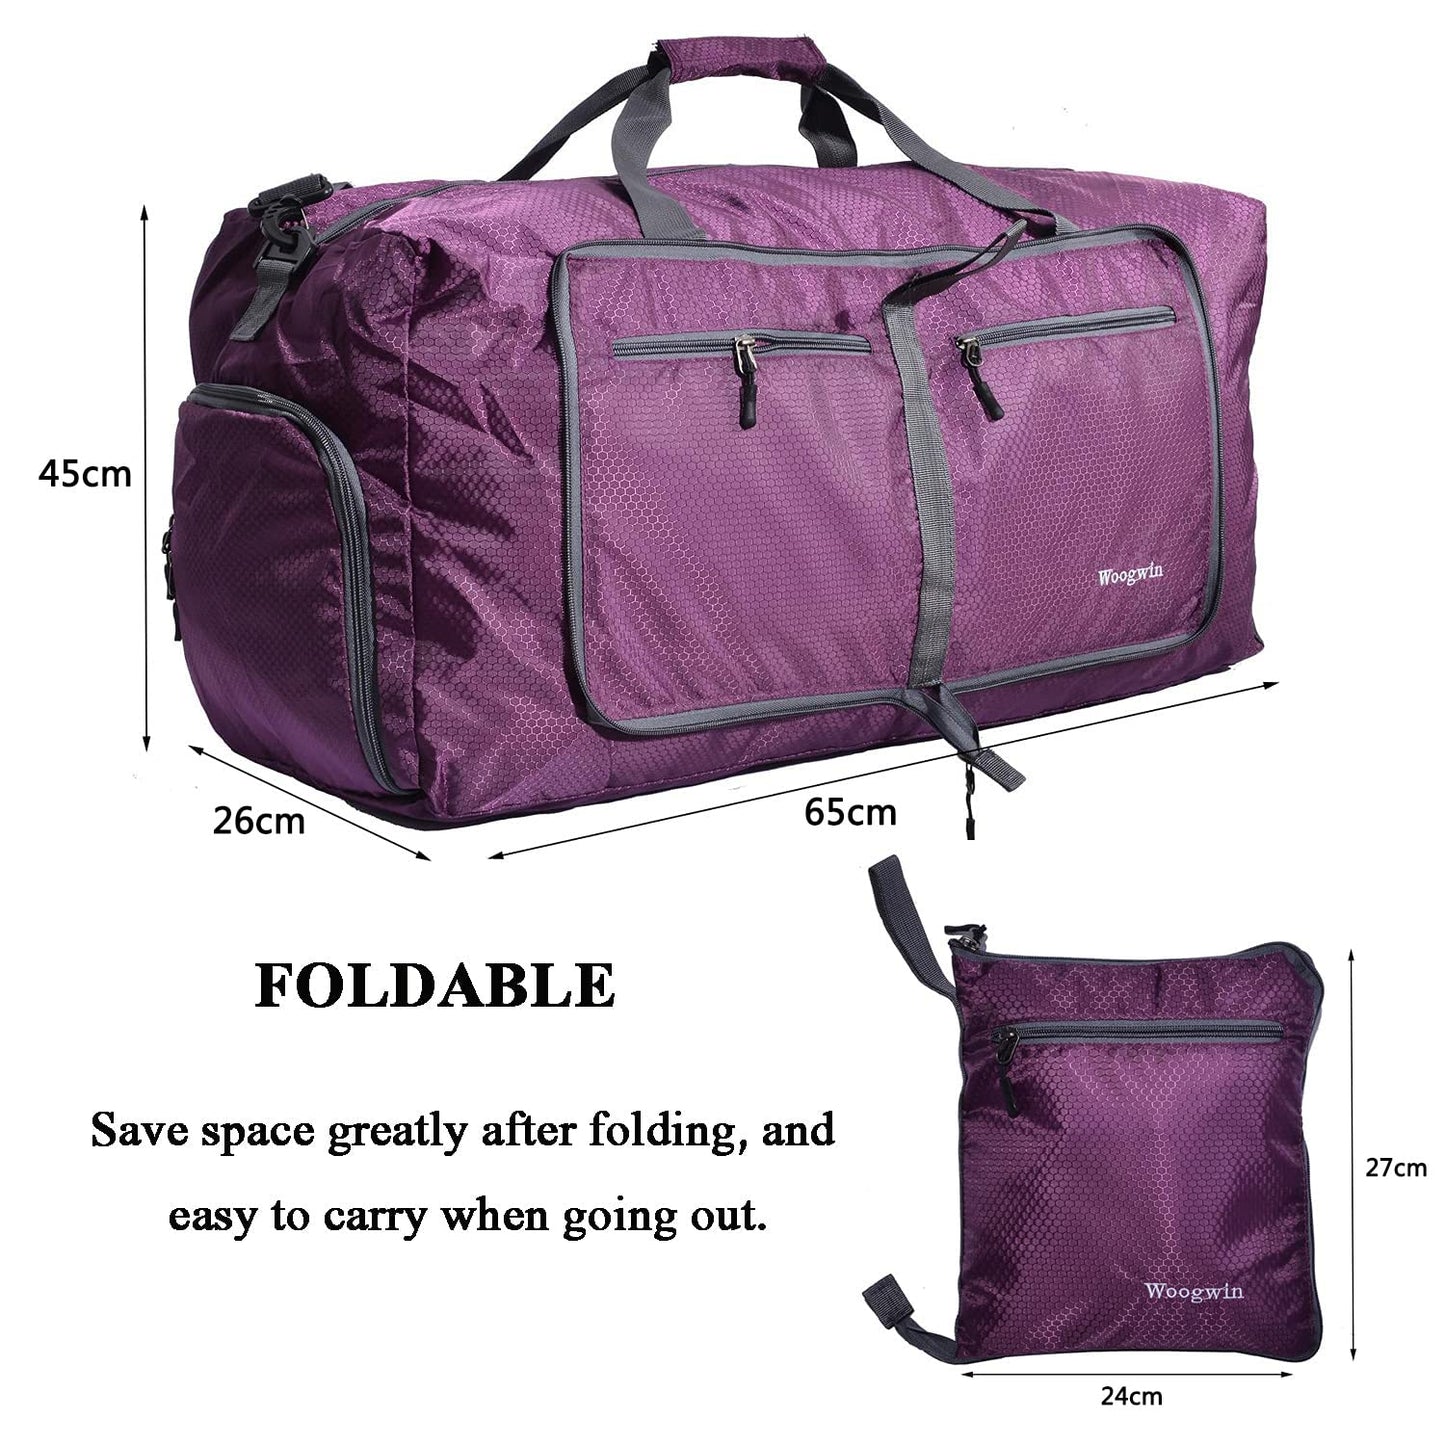 ehsbuy 60L Foldable Travel Duffle Bags for Men Women Large Holdall Bag Waterproof Overnight Weekend Bags for Gym Luggage, Purple, 60L